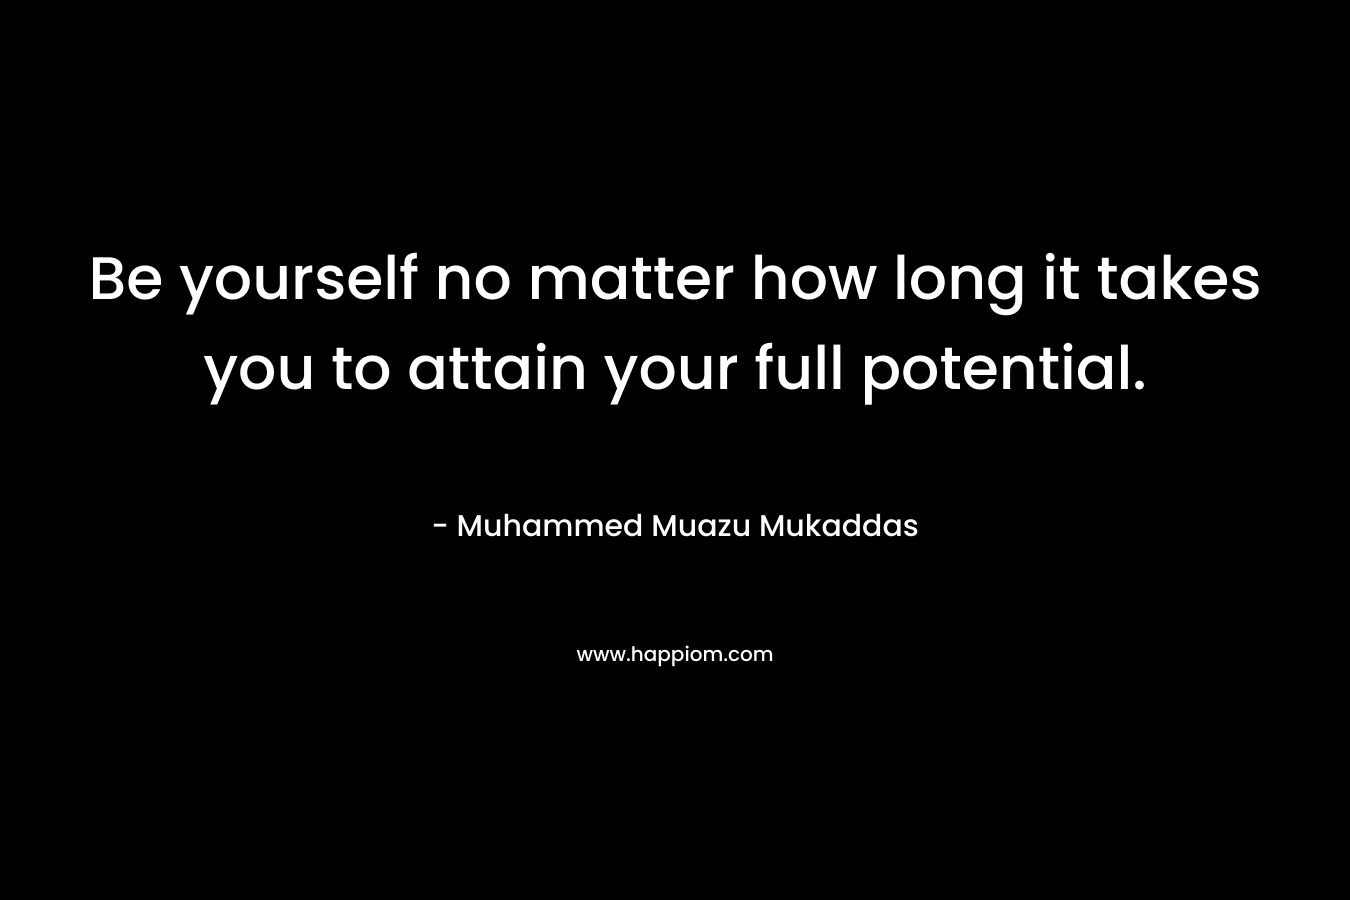 Be yourself no matter how long it takes you to attain your full potential. – Muhammed Muazu Mukaddas